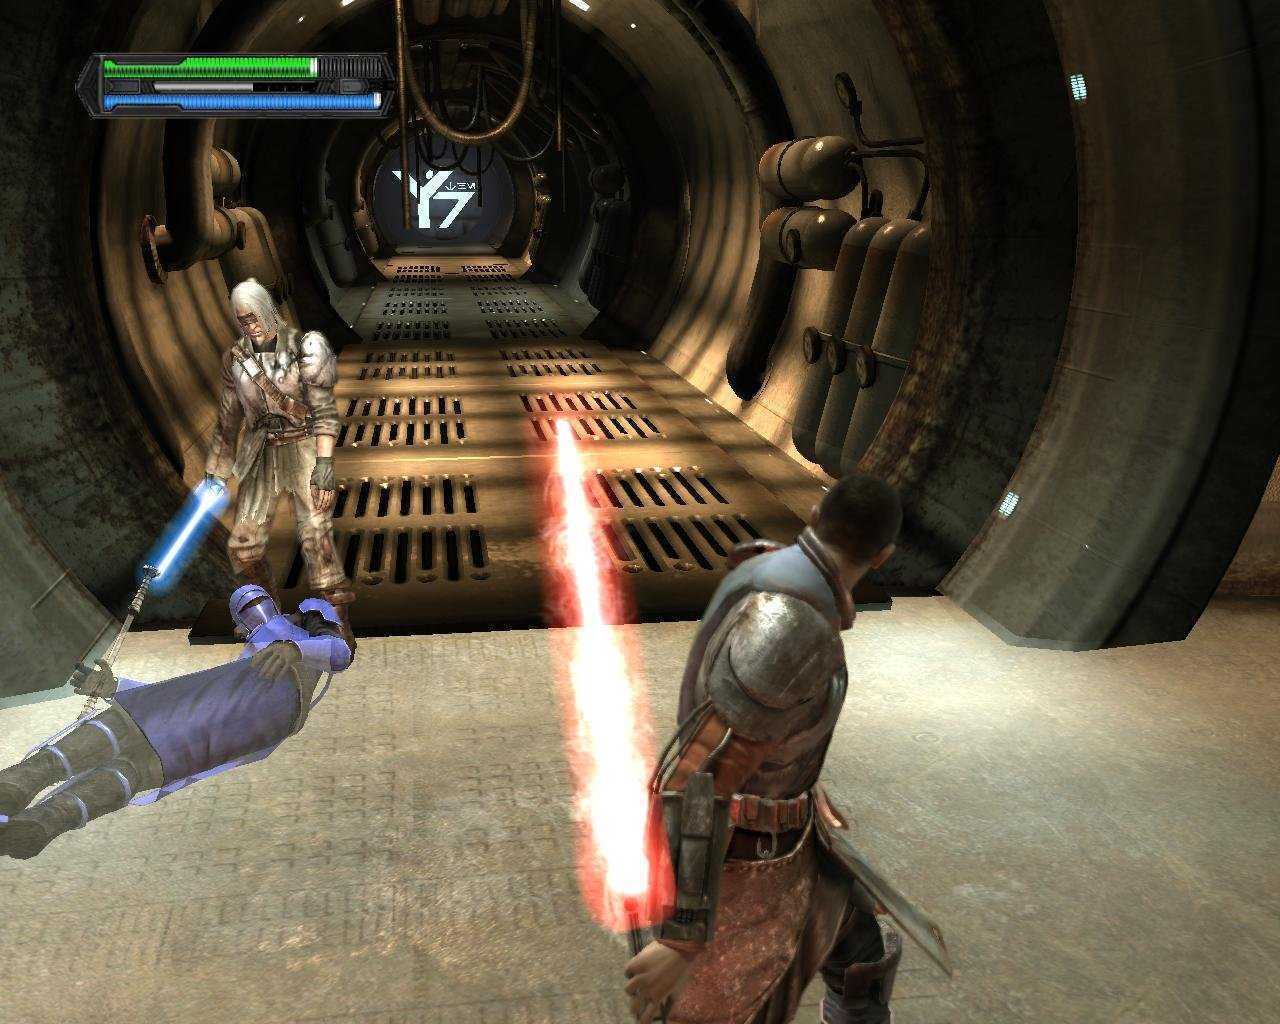 Игры про star wars. Star Wars the Force unleashed Ultimate Sith Edition (2009). Стар ВАРС the Force unleashed 1. Игра Star Wars: the Force unleashed II. Star Wars: the Force unleashed - Ultimate Sith Edition.